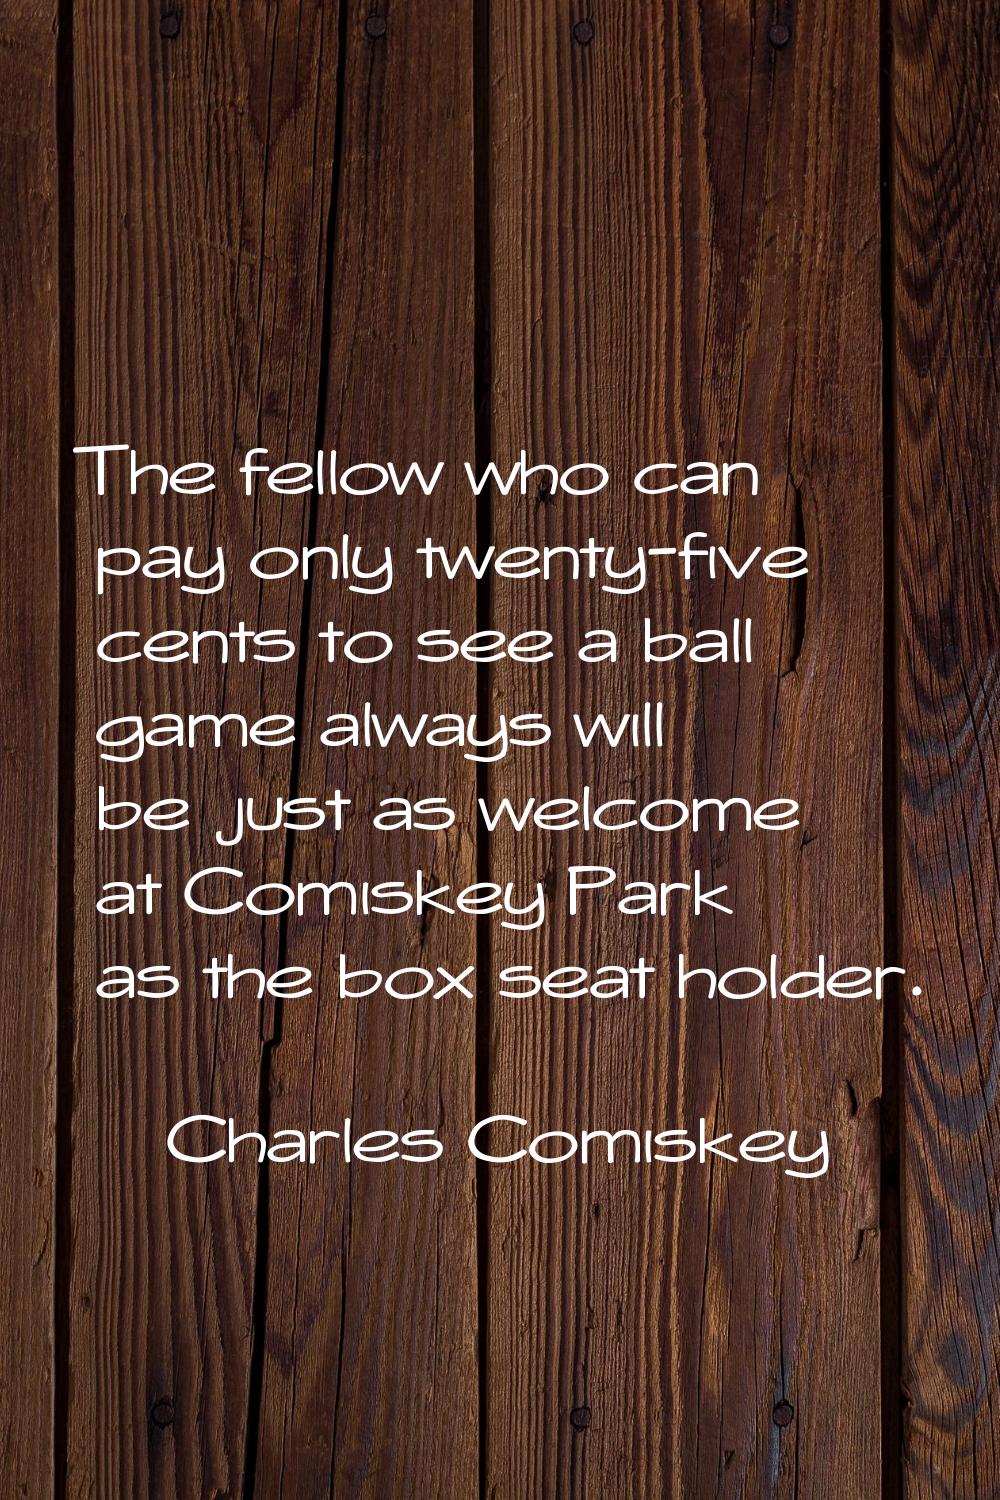 The fellow who can pay only twenty-five cents to see a ball game always will be just as welcome at 